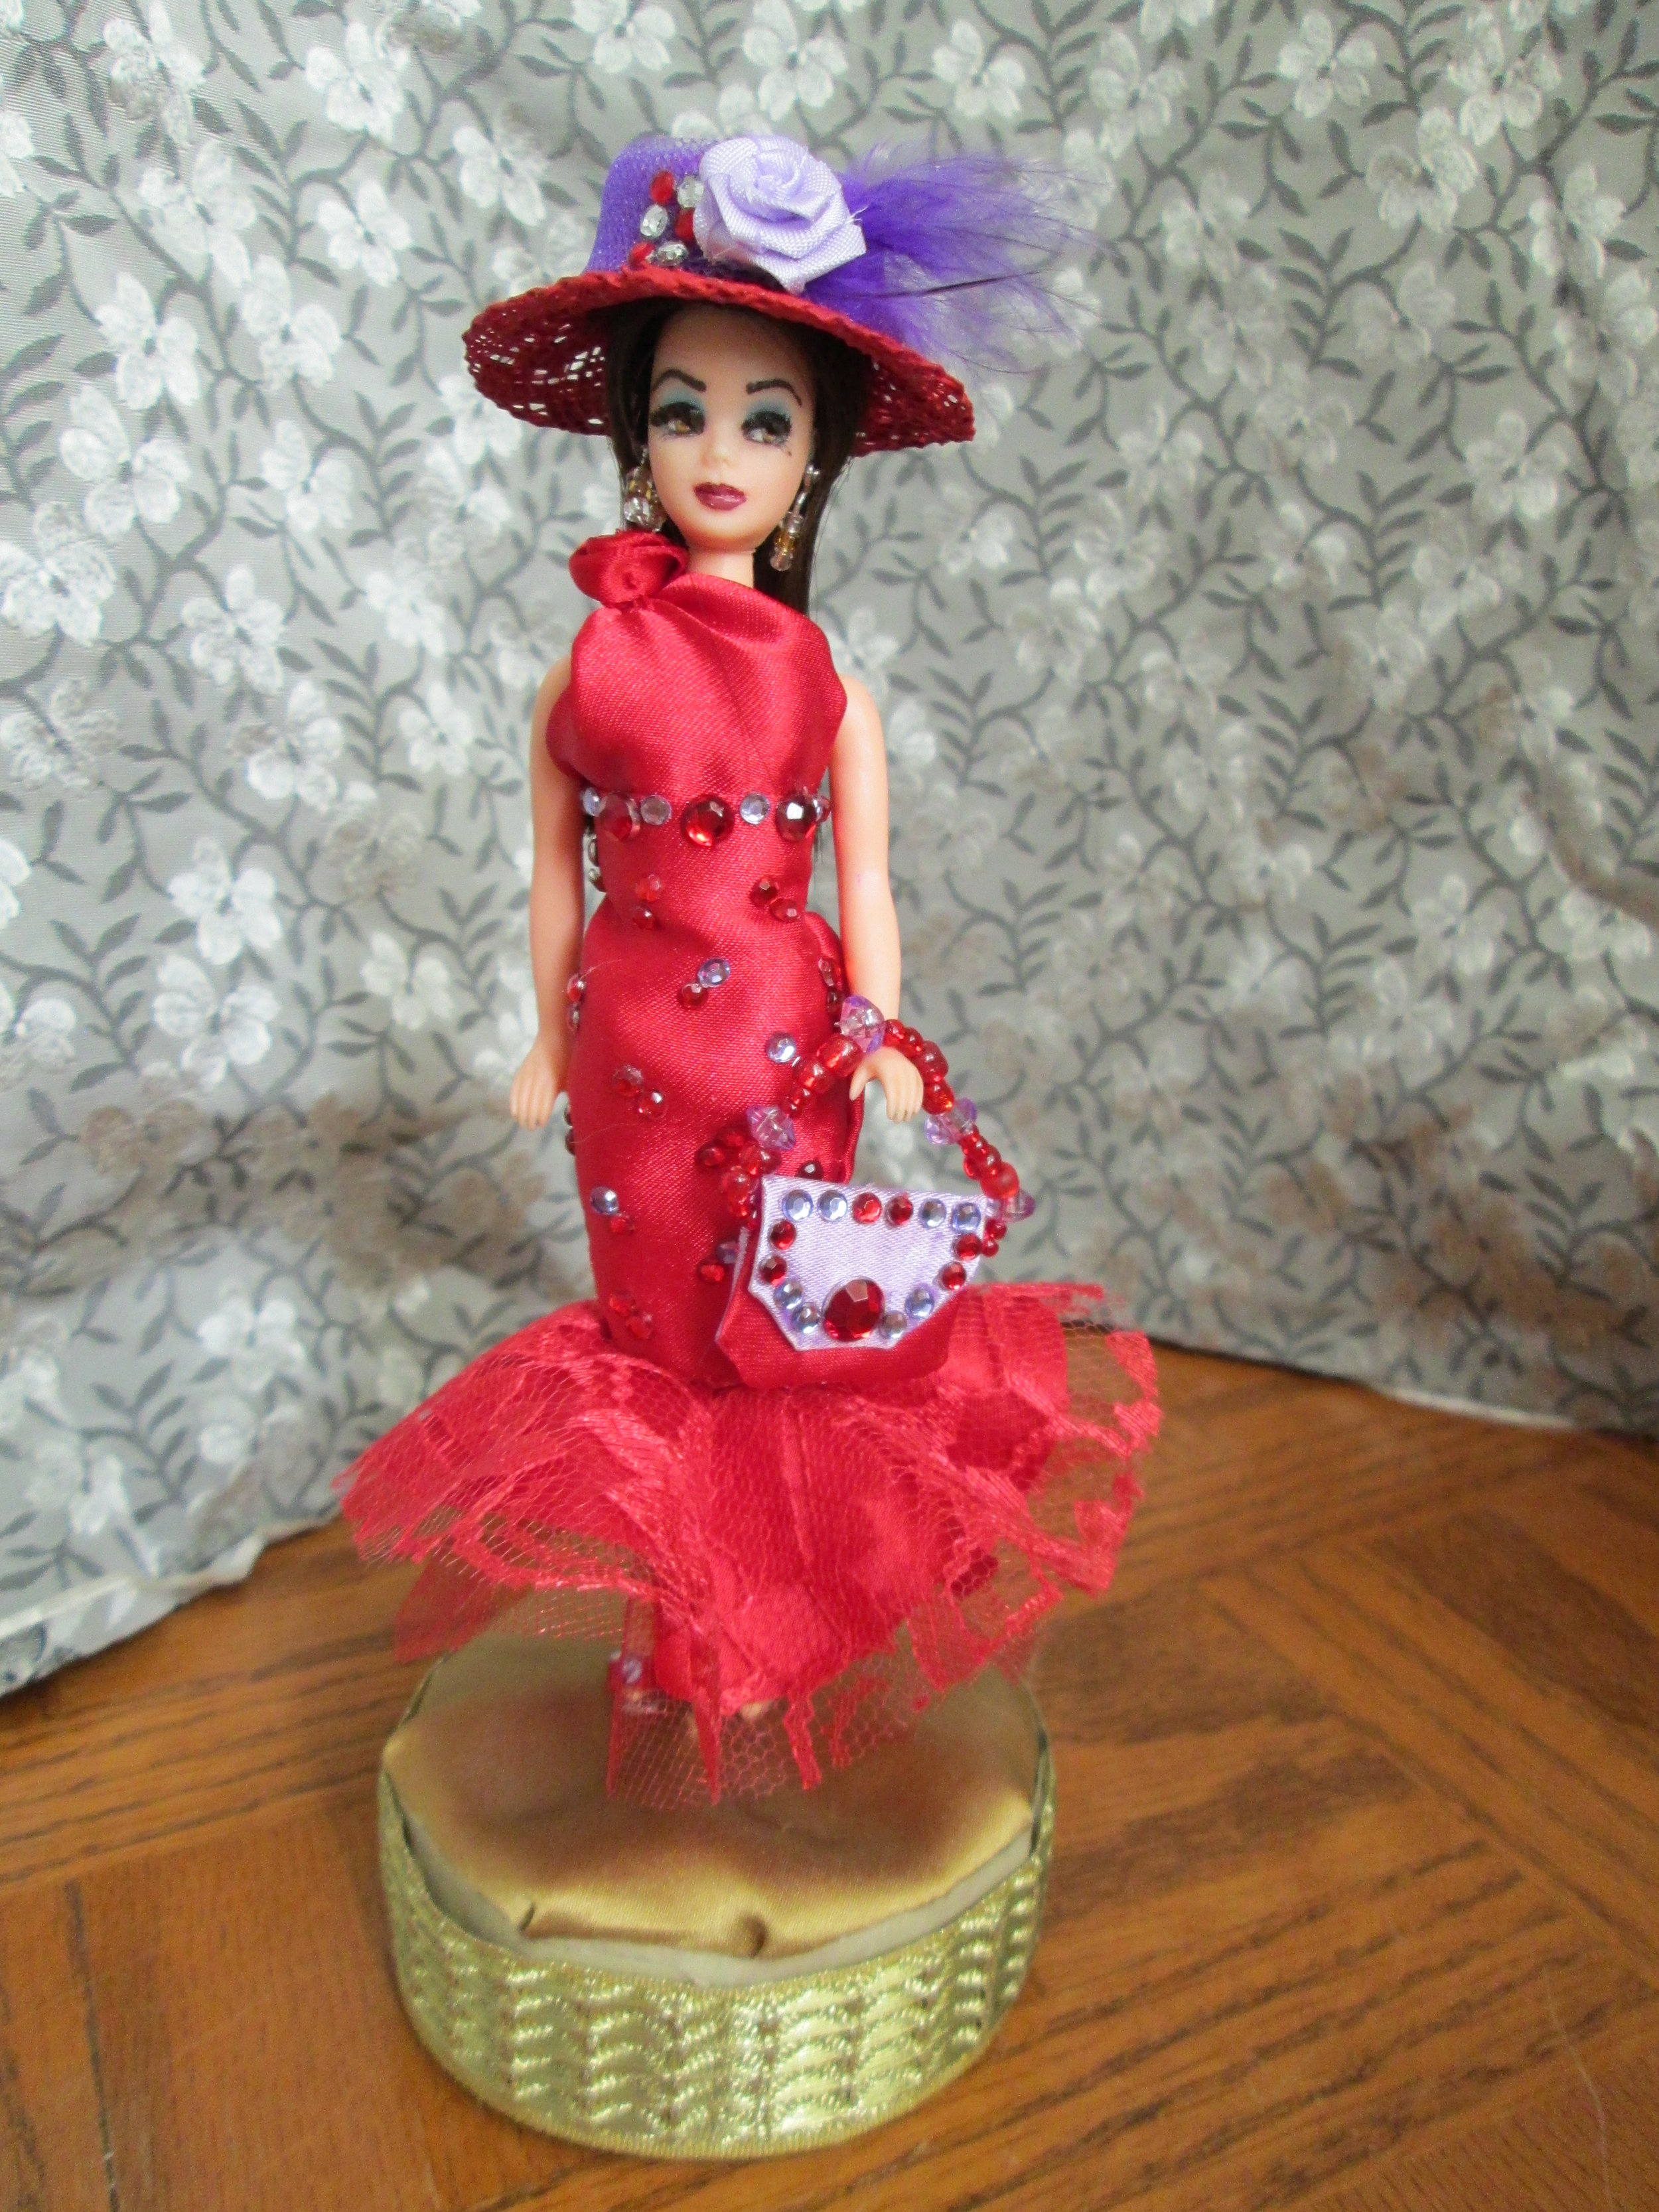 Handmade Dawn Doll Dresses and Accessories by JMB Designs